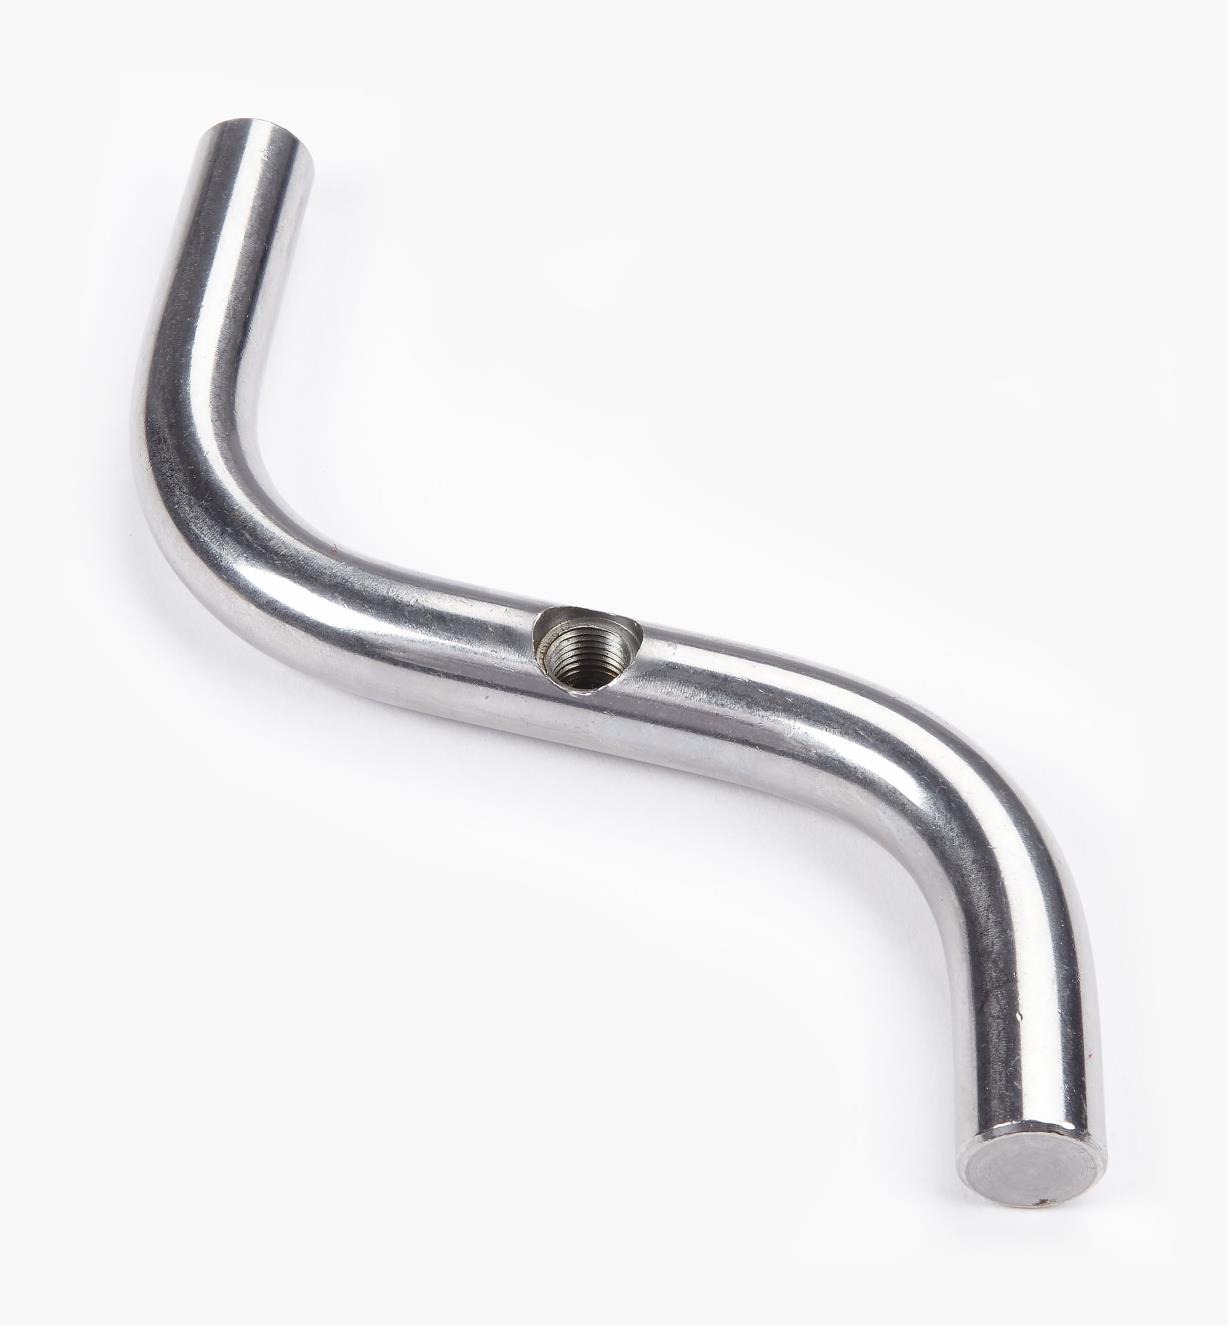 85S0836 - 9" "S" Curve External Bowl Support